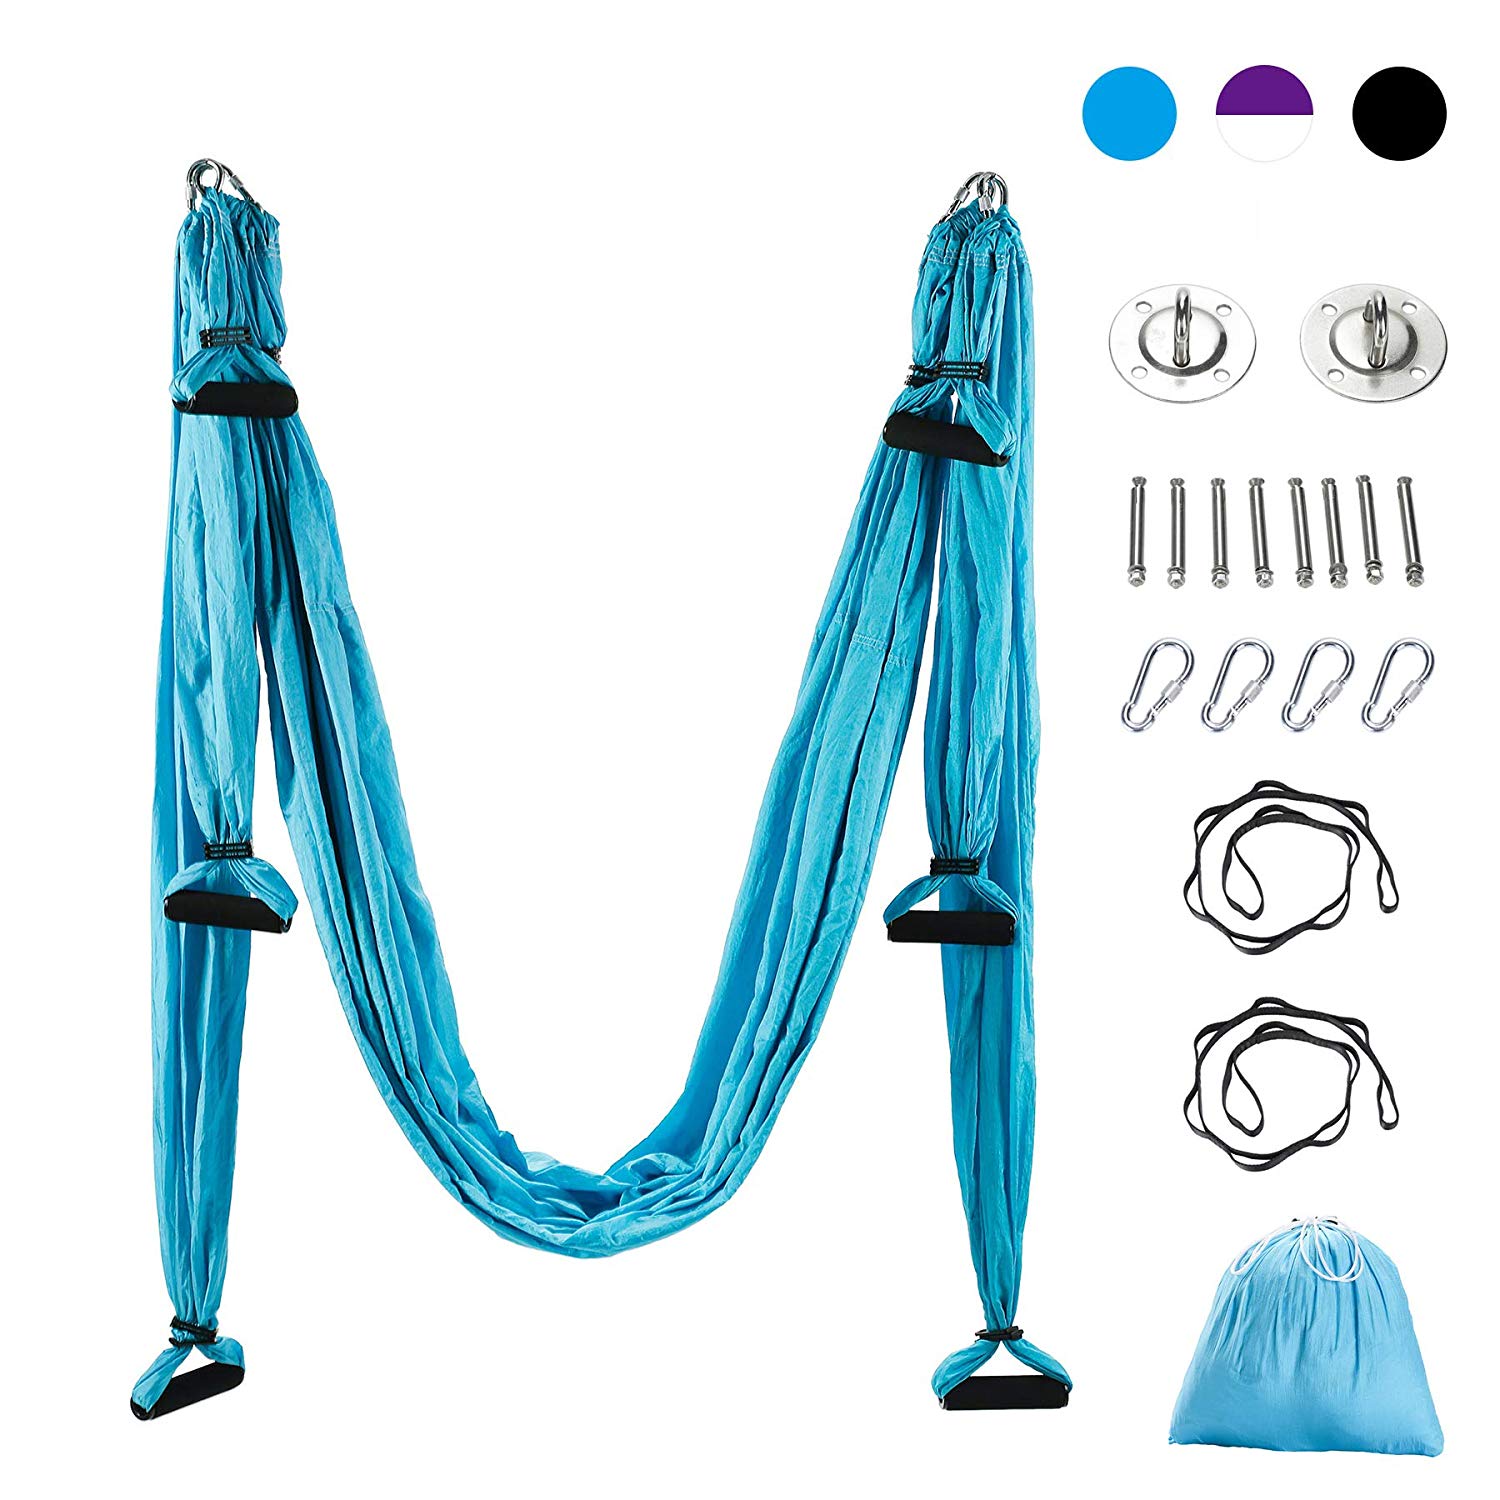 Low price for Pu Yoga Mat -
 Yoga Swing & Hammock Kit for Improved Yoga Inversions – Rise Group